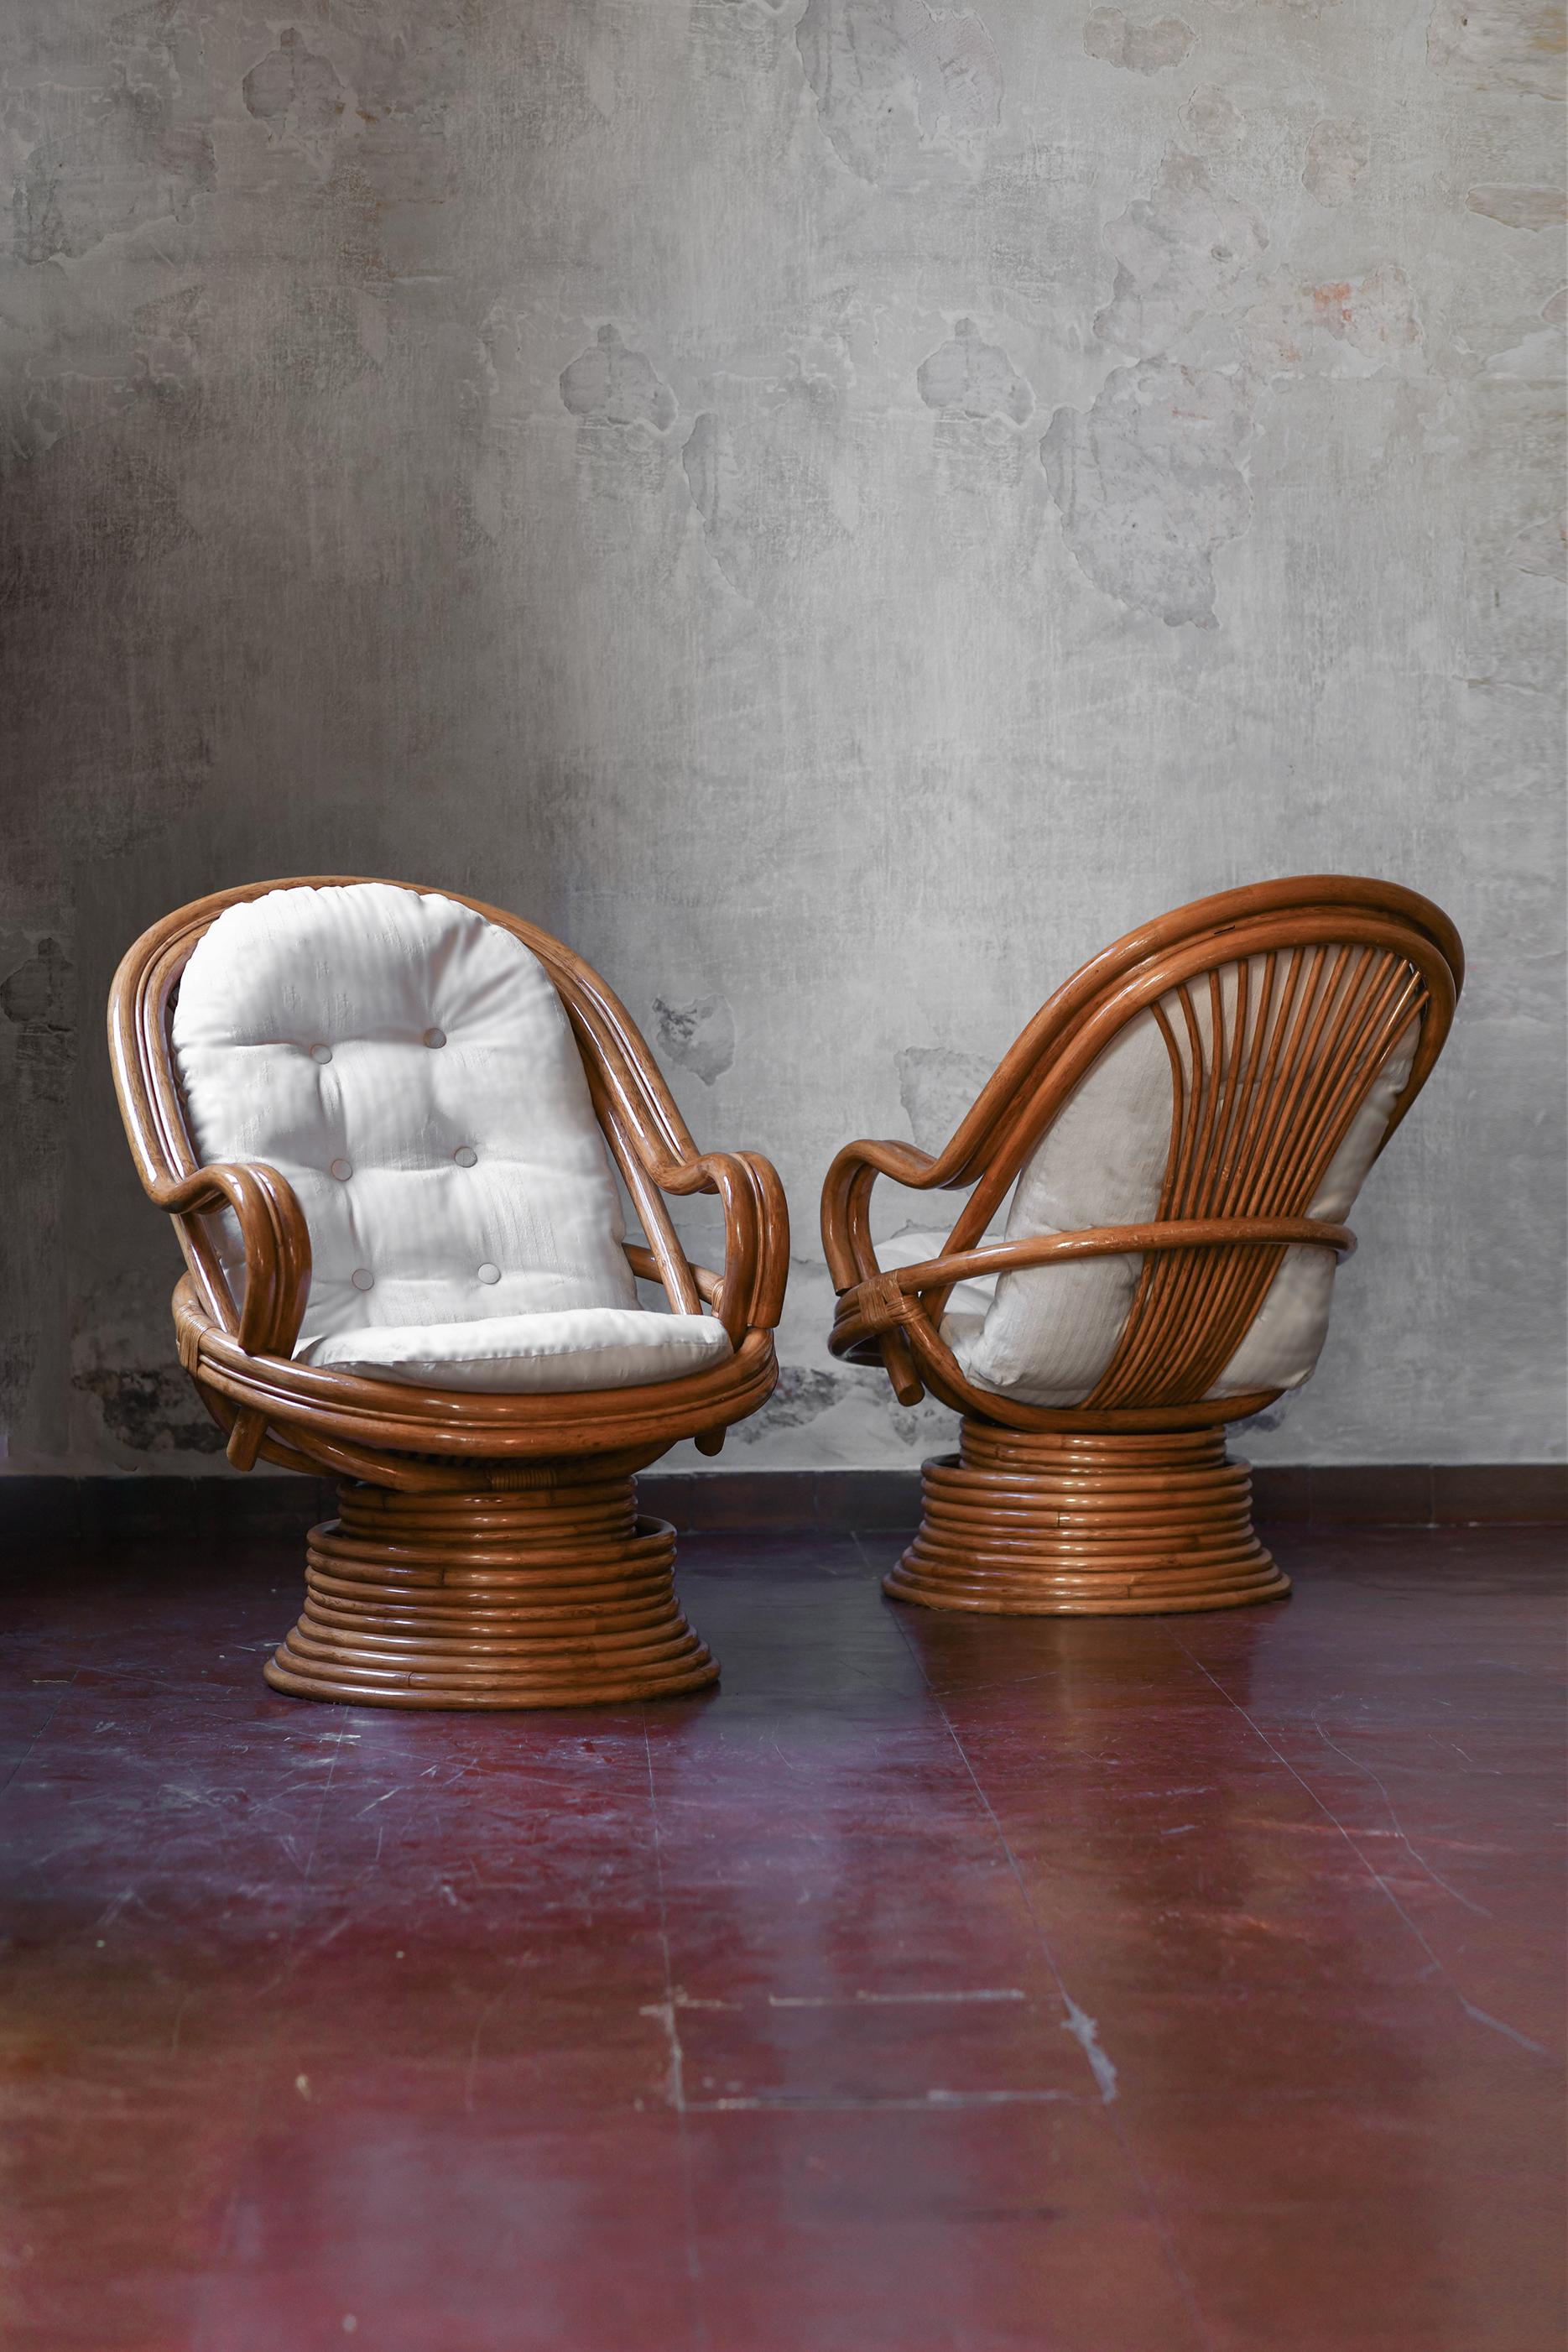 PAIR OF SWIVEL RATTAN ARMCHAIRS WITH CUSHIONS AND COFFEE TABLE, ITALY 1960
Product details
Armchair dimensions: 80 w x 110 h x 100 d cm
Table dimensions: 66 w x 50 h x 66 d cm